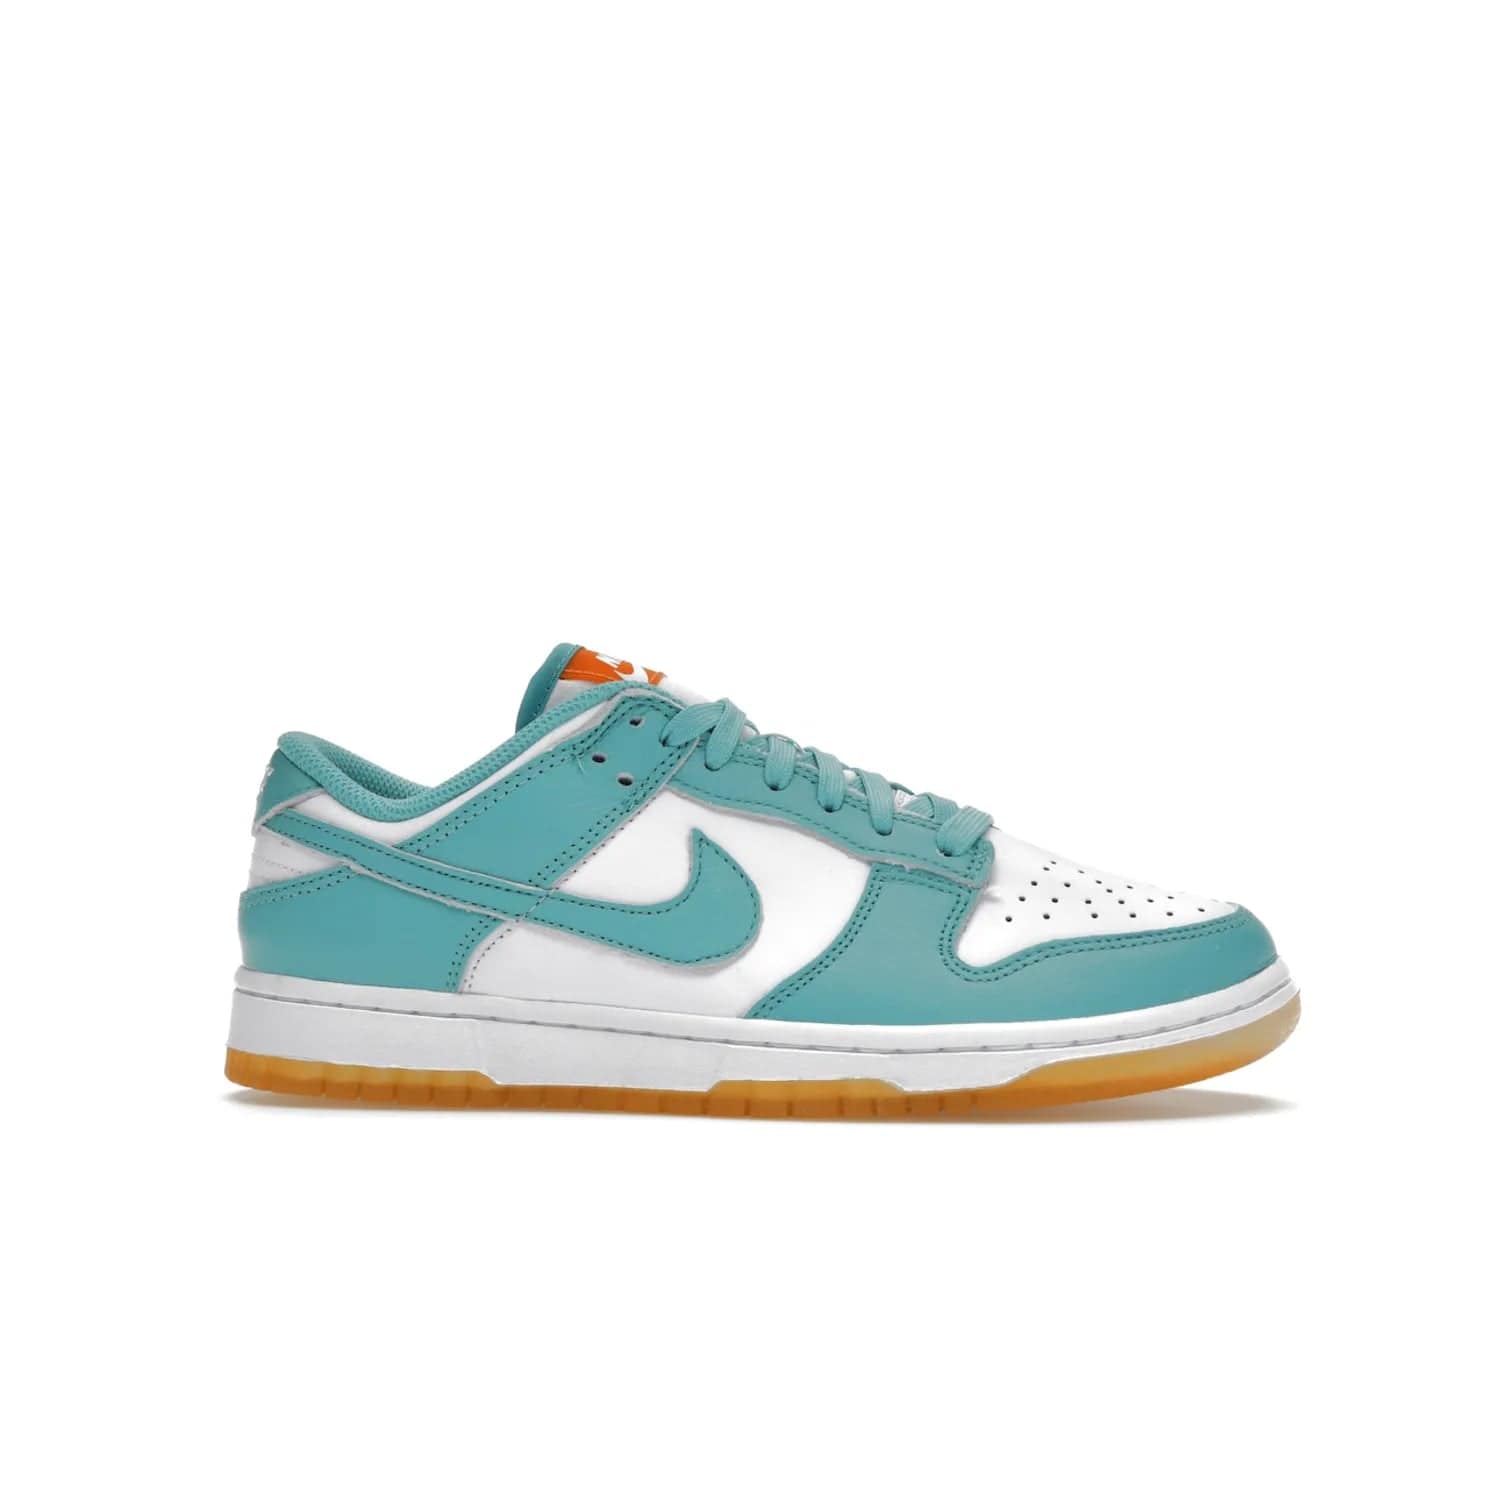 Nike Dunk Low Teal Zeal (Women's) - Image 2 - Only at www.BallersClubKickz.com - A white leather upper with teal overlays and Swooshes, plus yellow and embroidered accents make the Nike Dunk Low Teal Zeal (Women's) the perfect statement piece for any wardrobe.